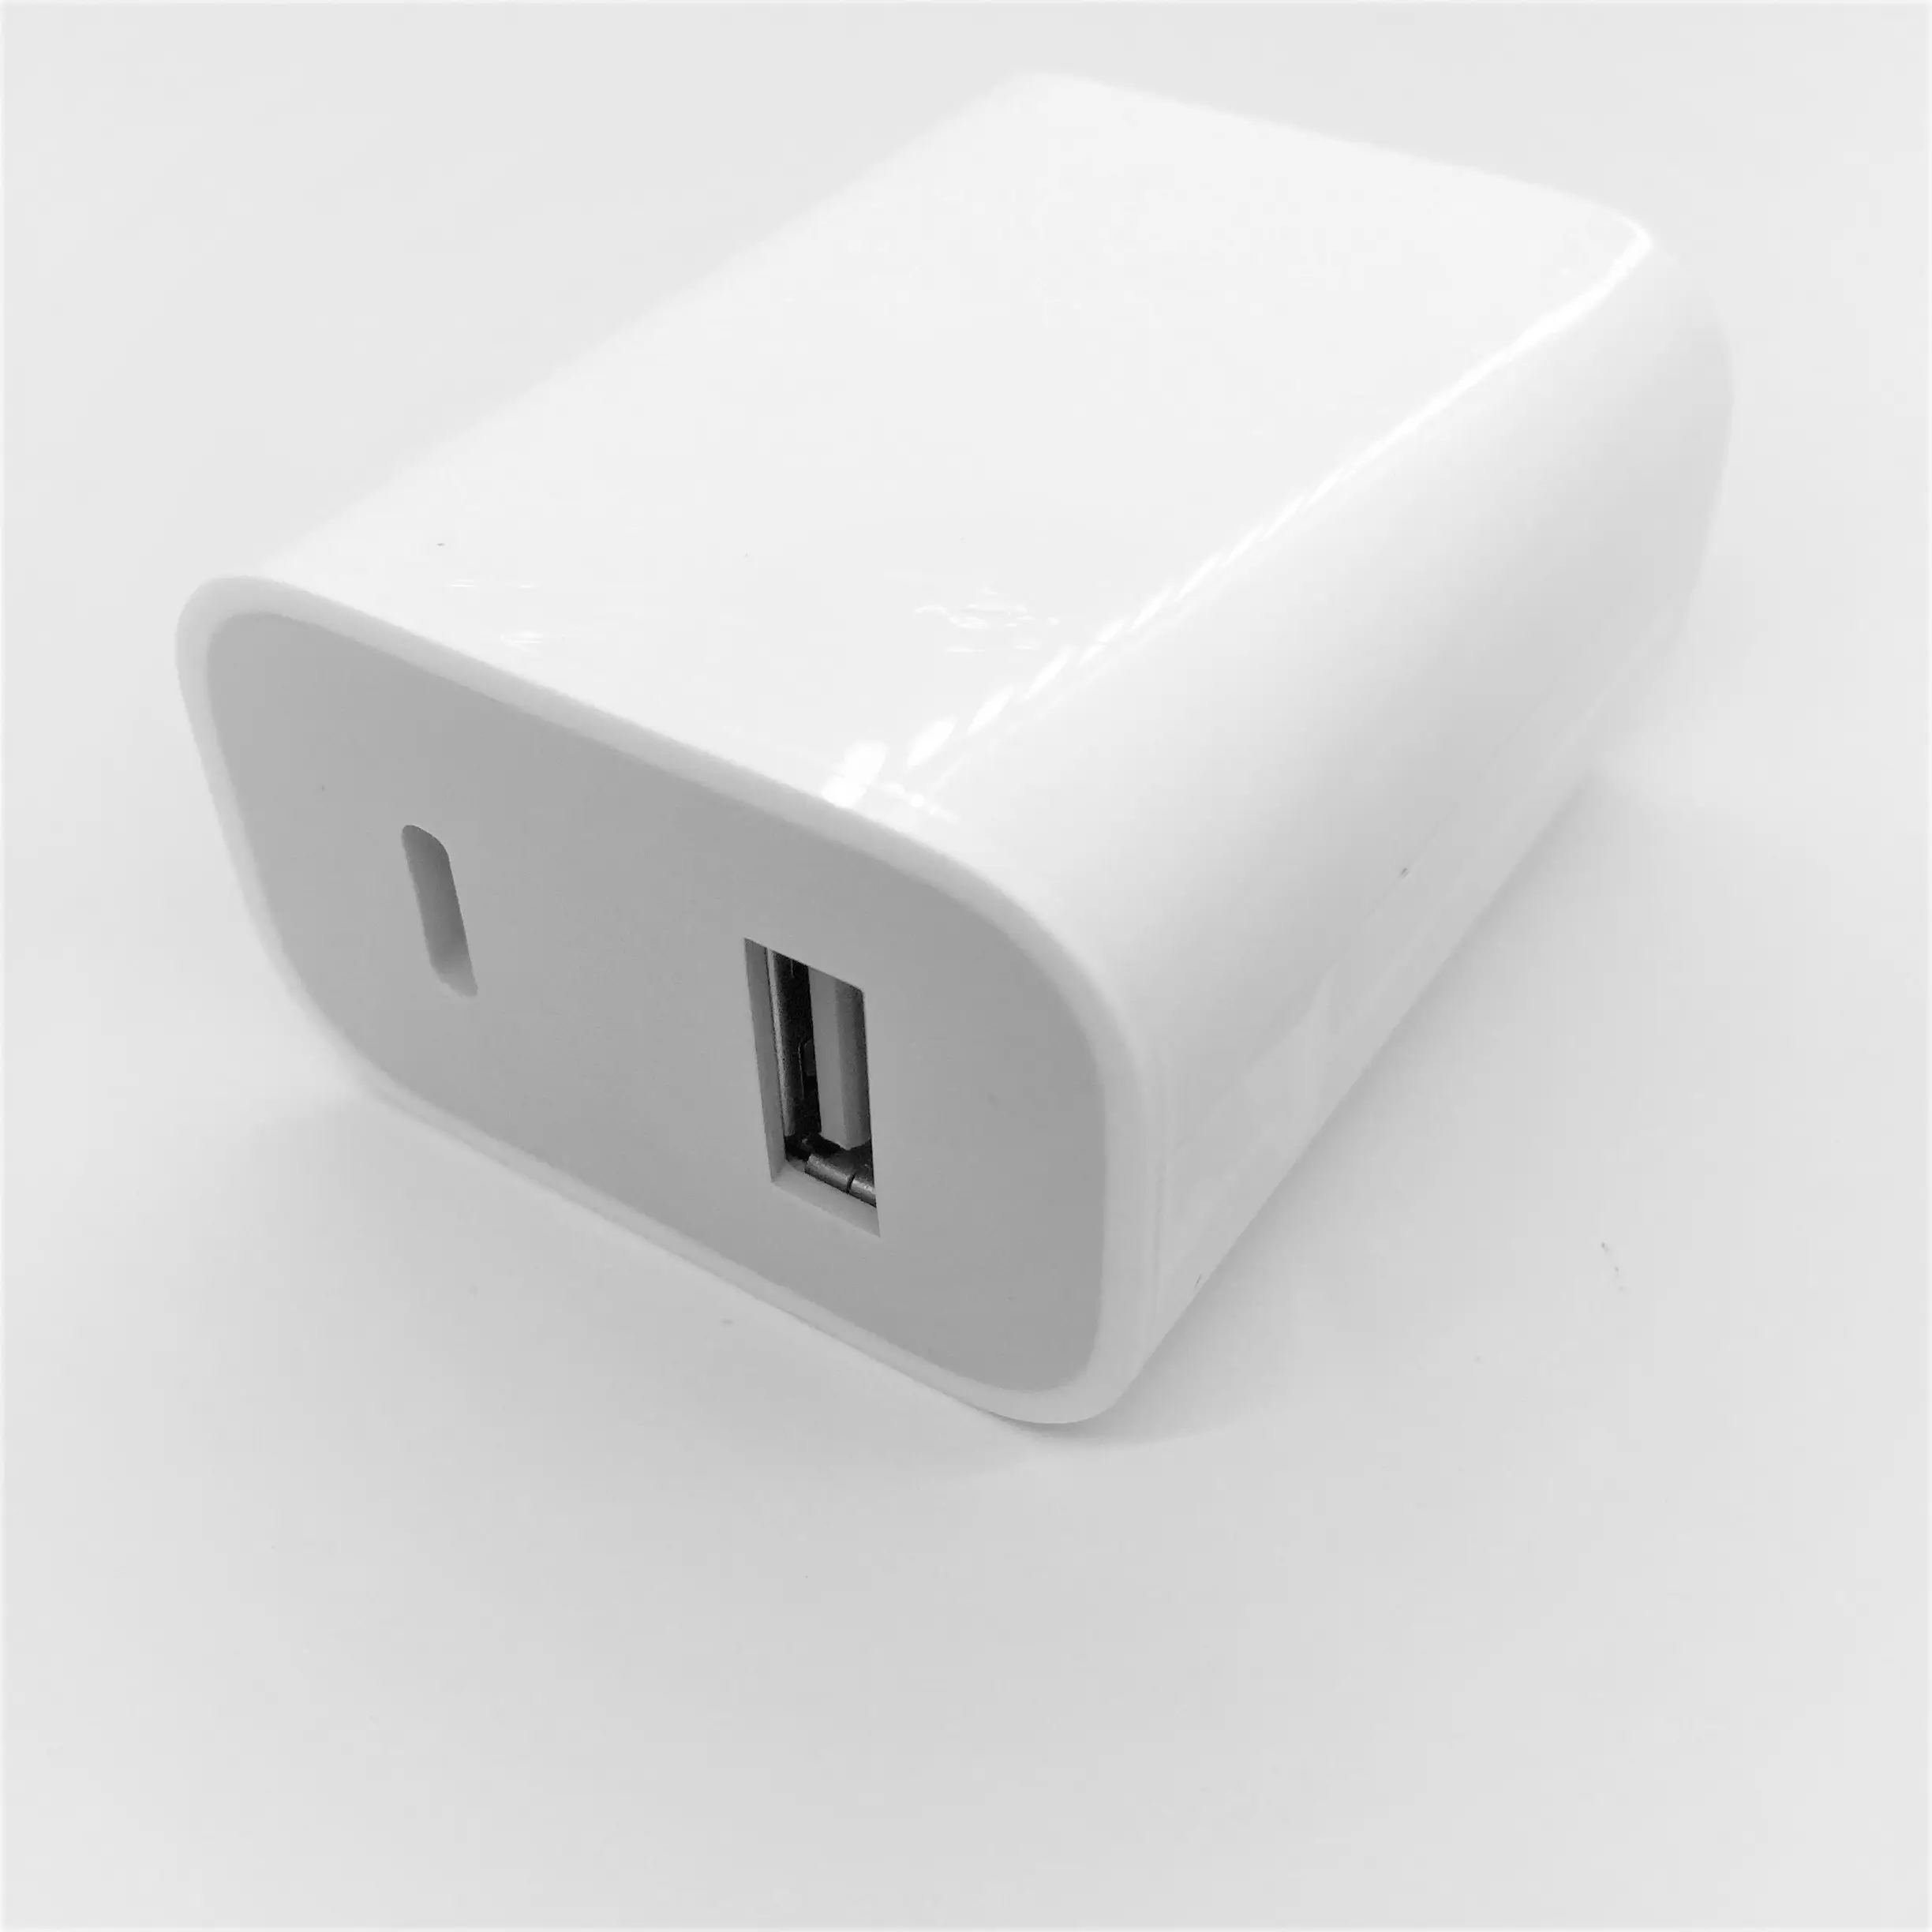 25W Super Fast Charging USB Type Tipo C Pd Portable Portatil Cargador Chargeur Mobile Phone Wall Charger For iPhone Samsung